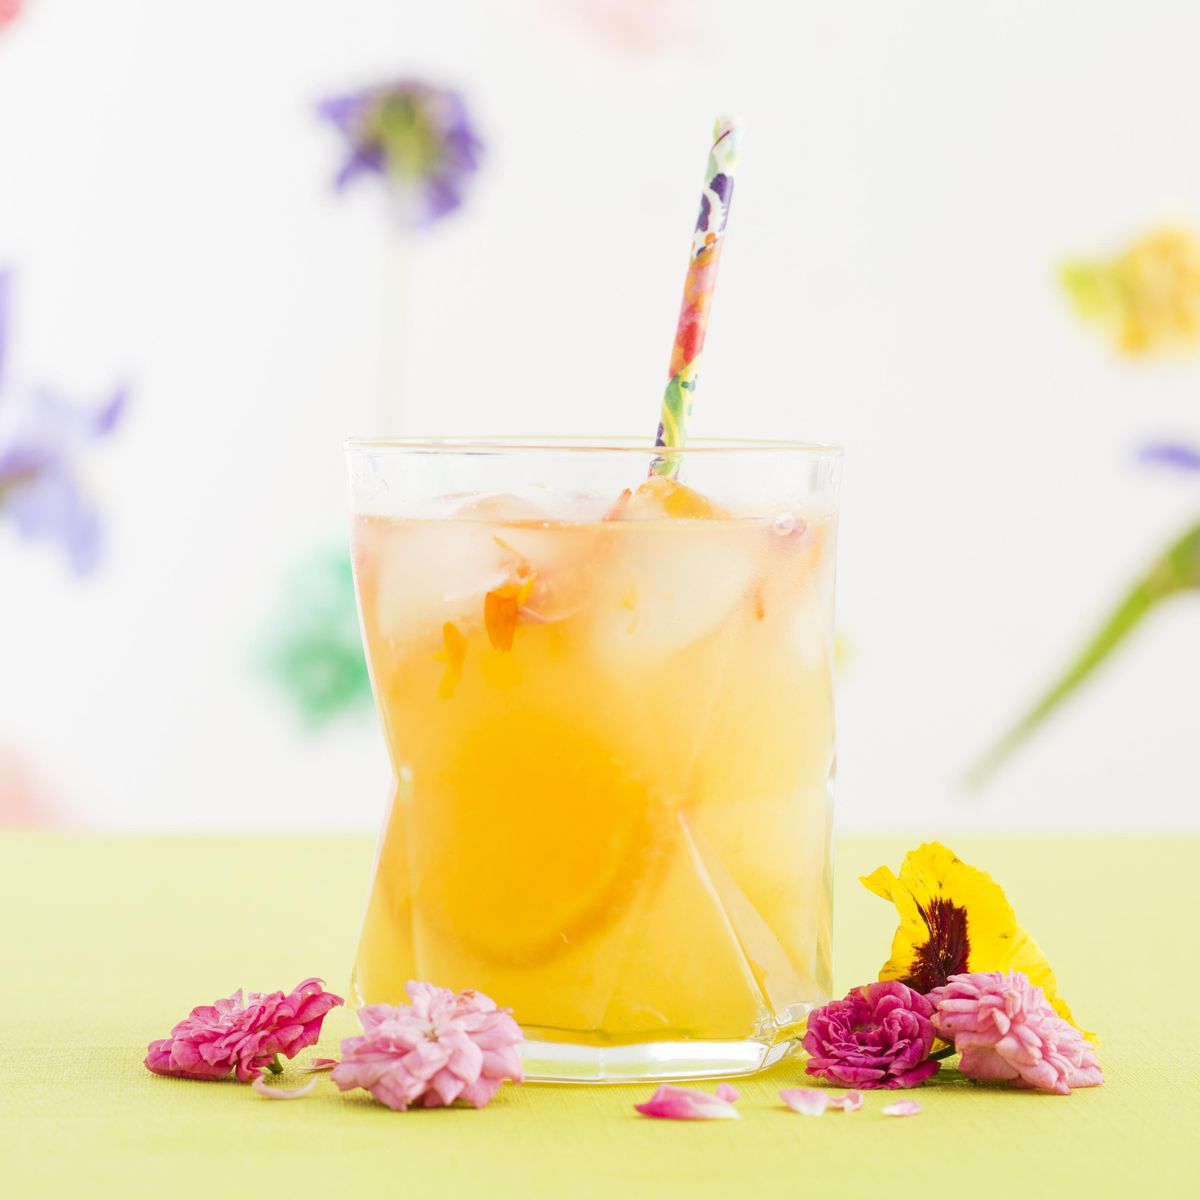 diy turmeric tonic surrounded by pink flowers